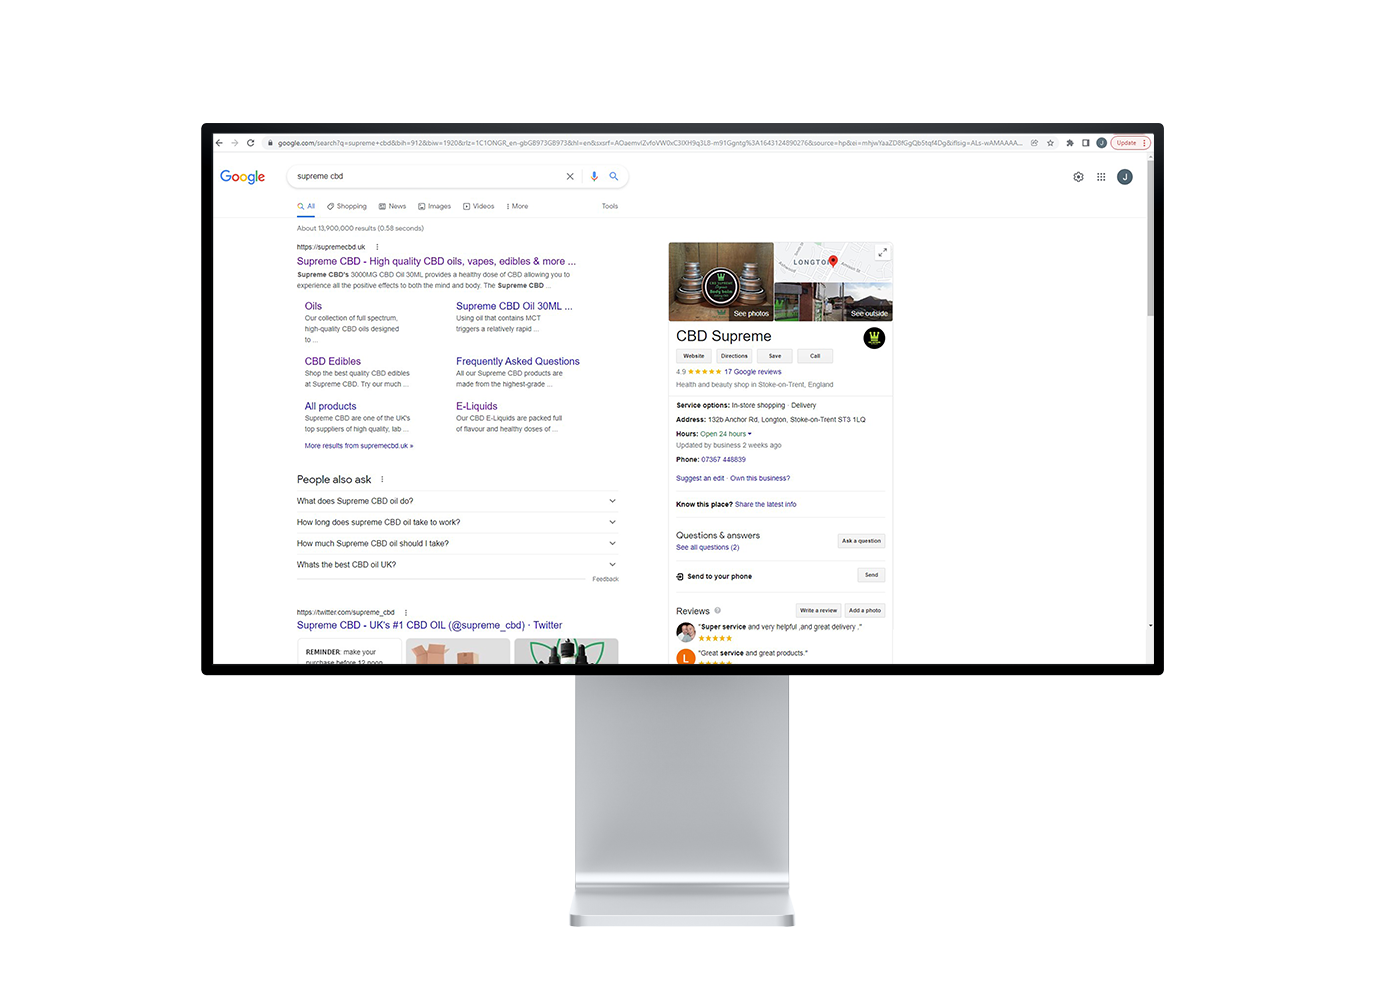 Mockup of a desktop screen showing the Google search results for Supreme CBD